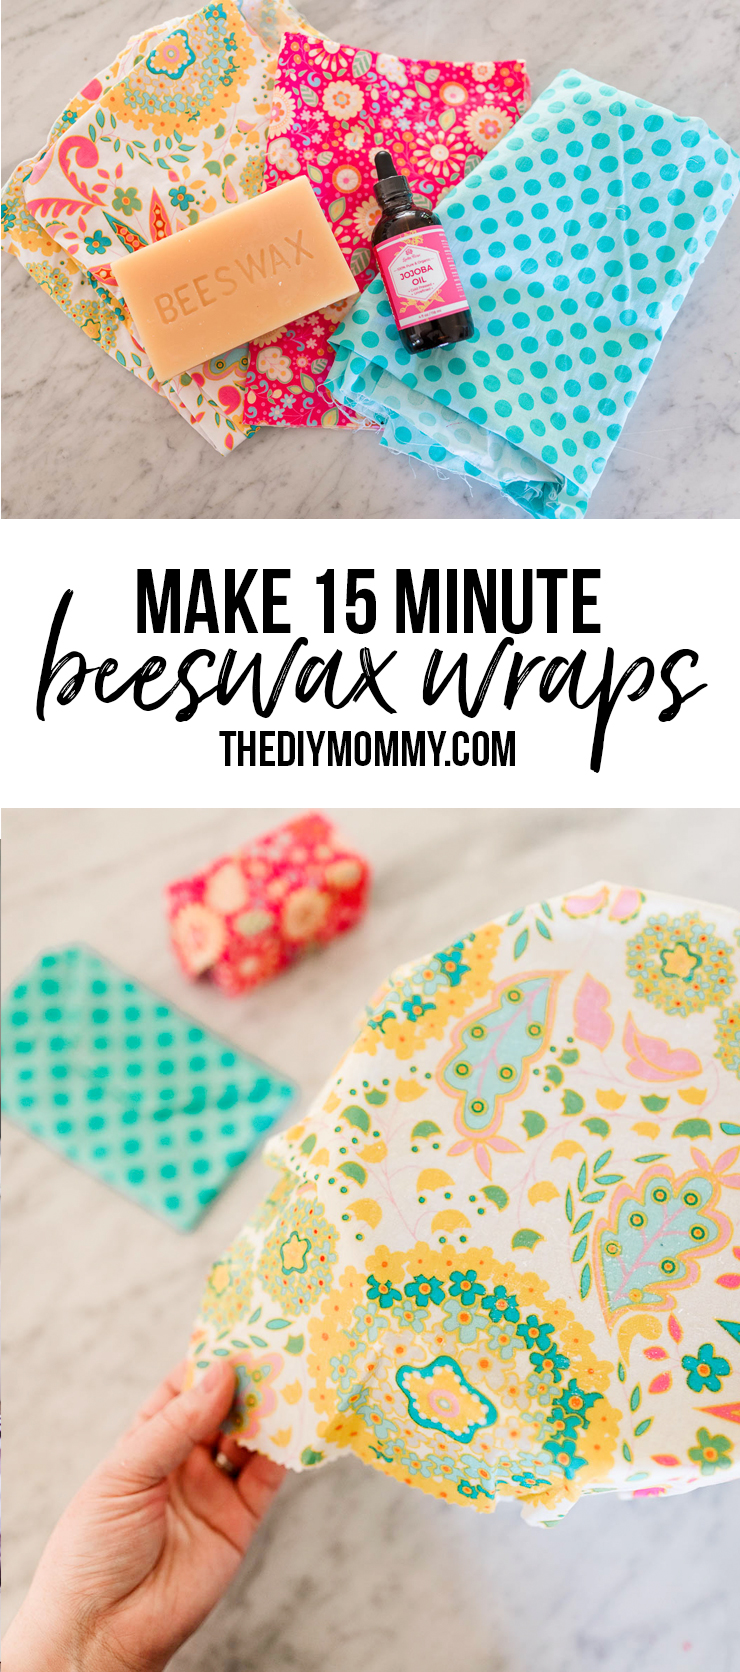 Step-by-step and video tutorial on how to make beeswax wraps